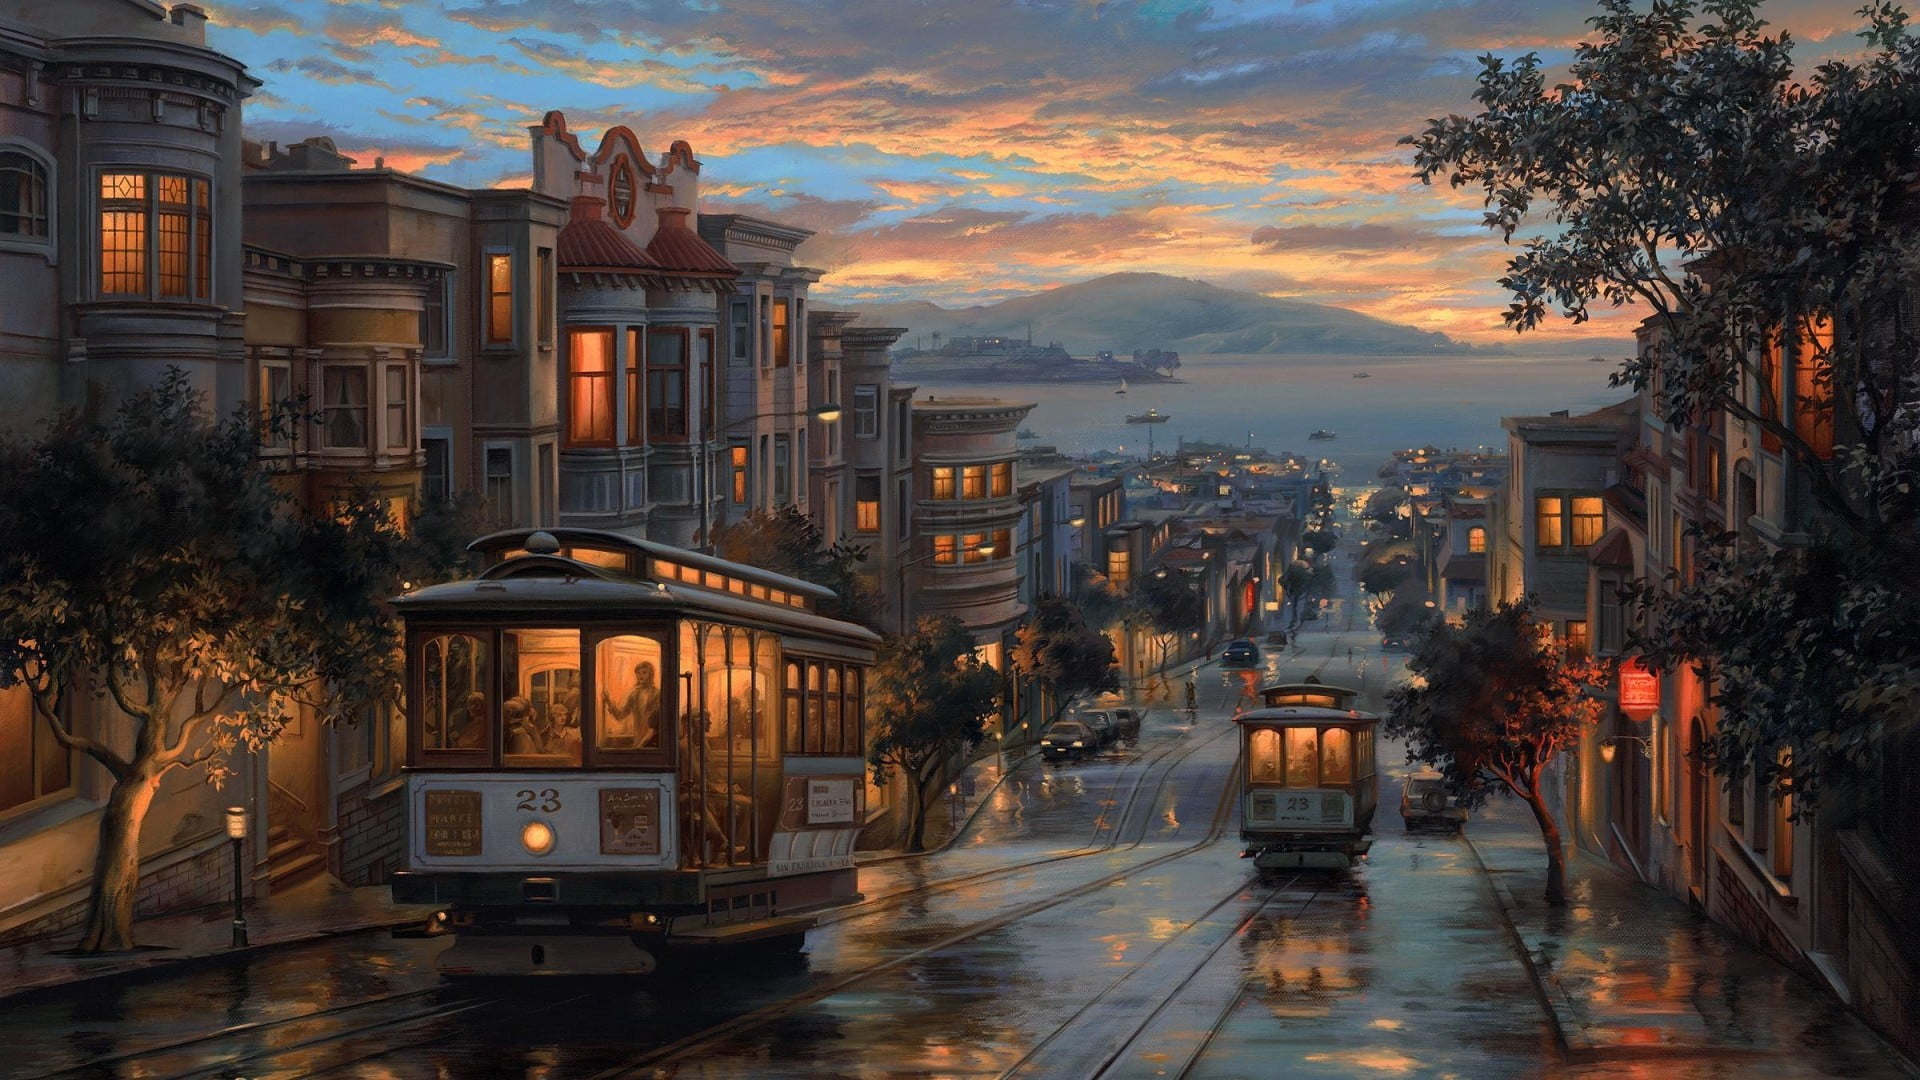 white and black cable cars, painting, San Francisco, architecture